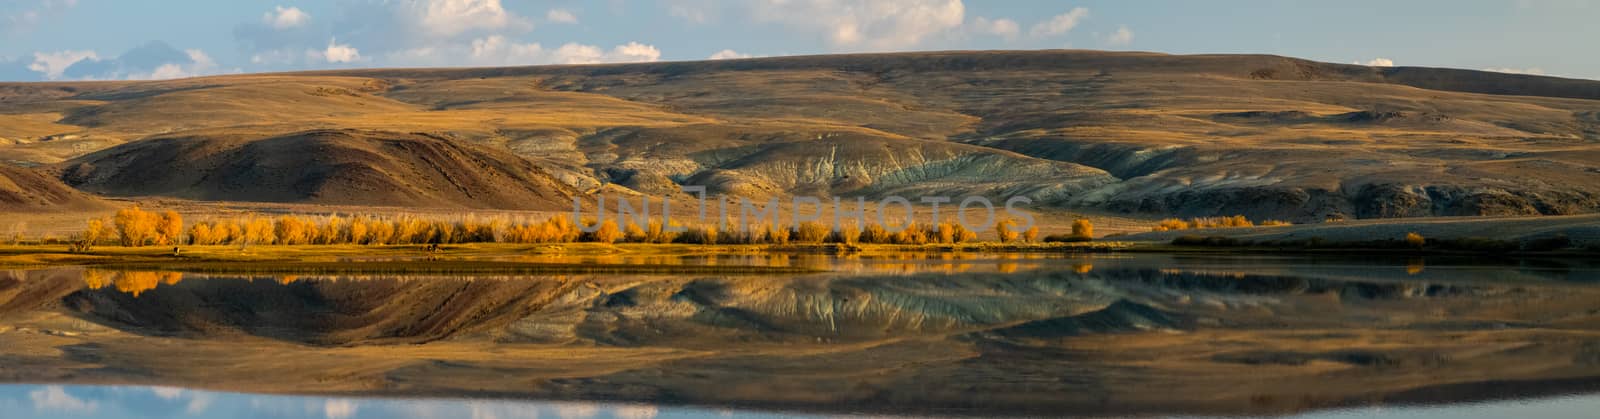 Lake in Altai Mountains. Panorama of the Altai landscape in the mountains. The time of year is autumn. by DePo